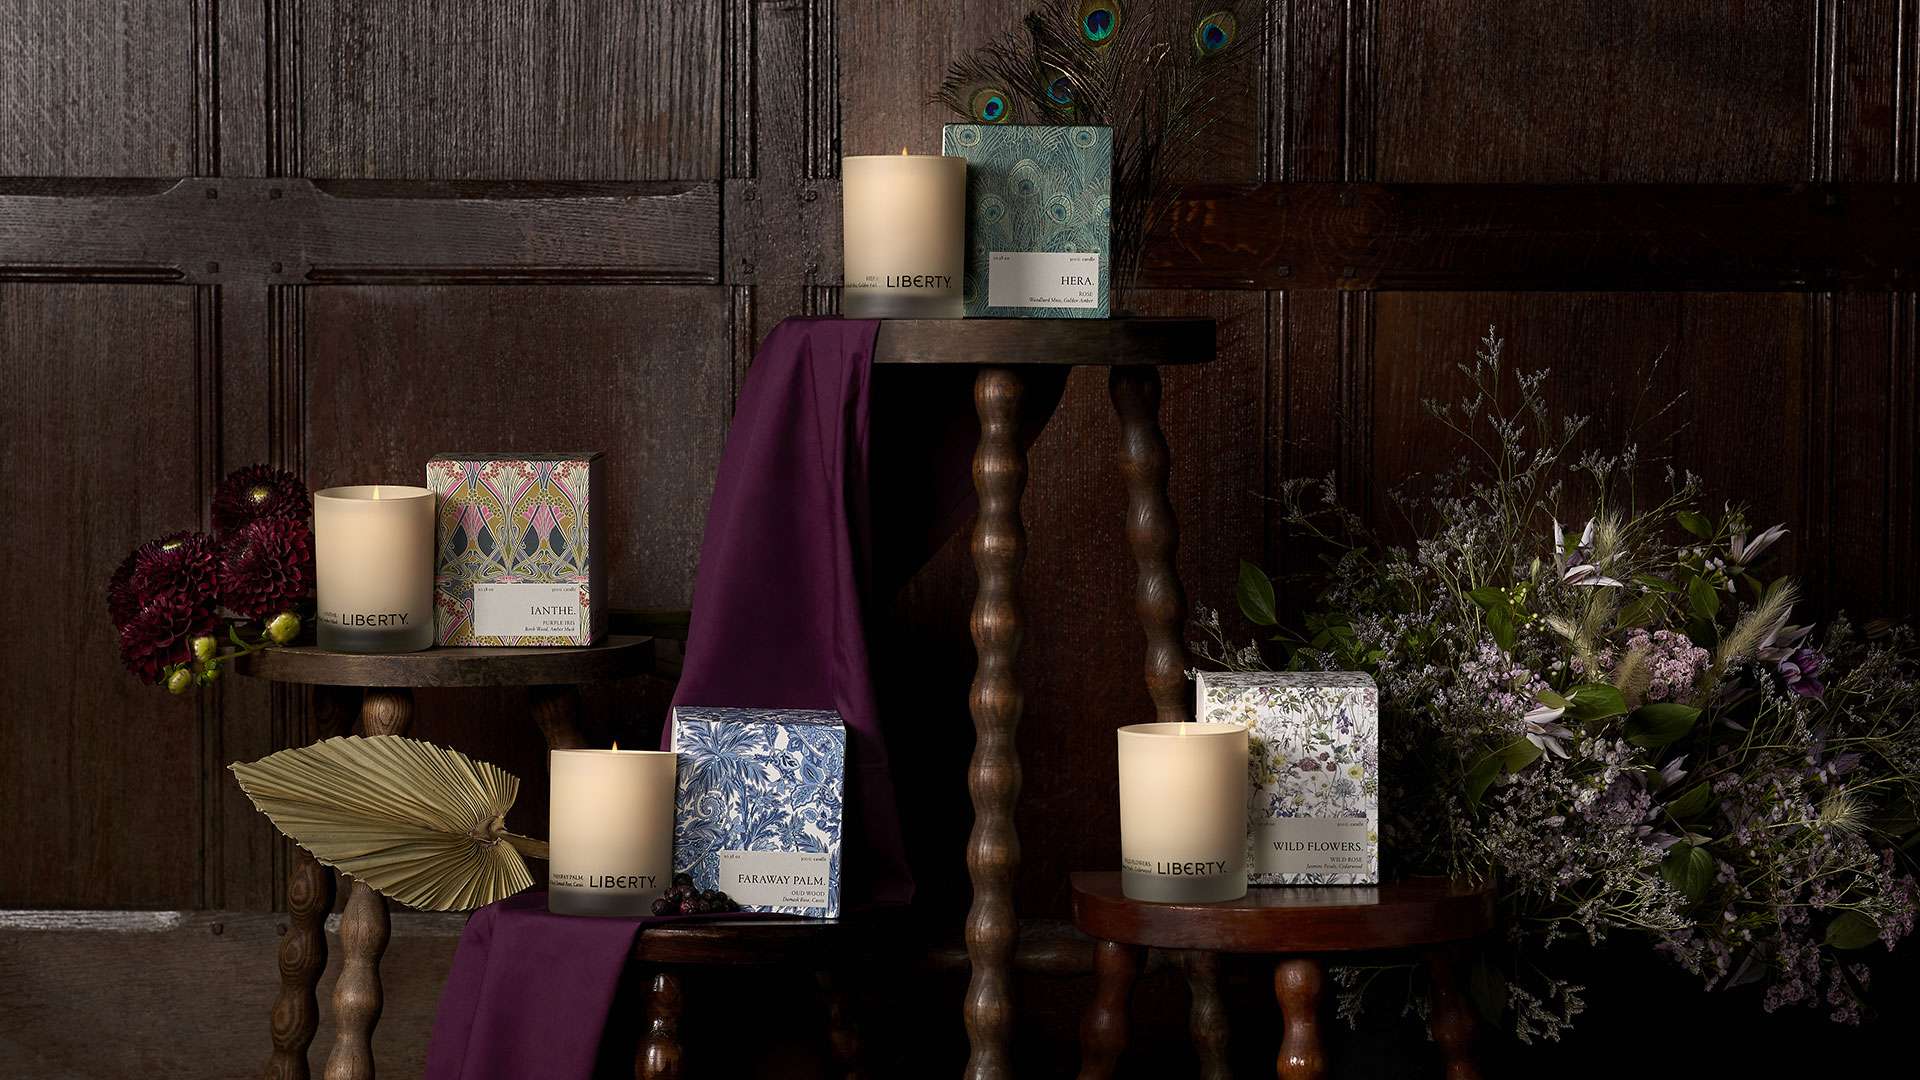 Take Notes: A Scented Candle for Every Room